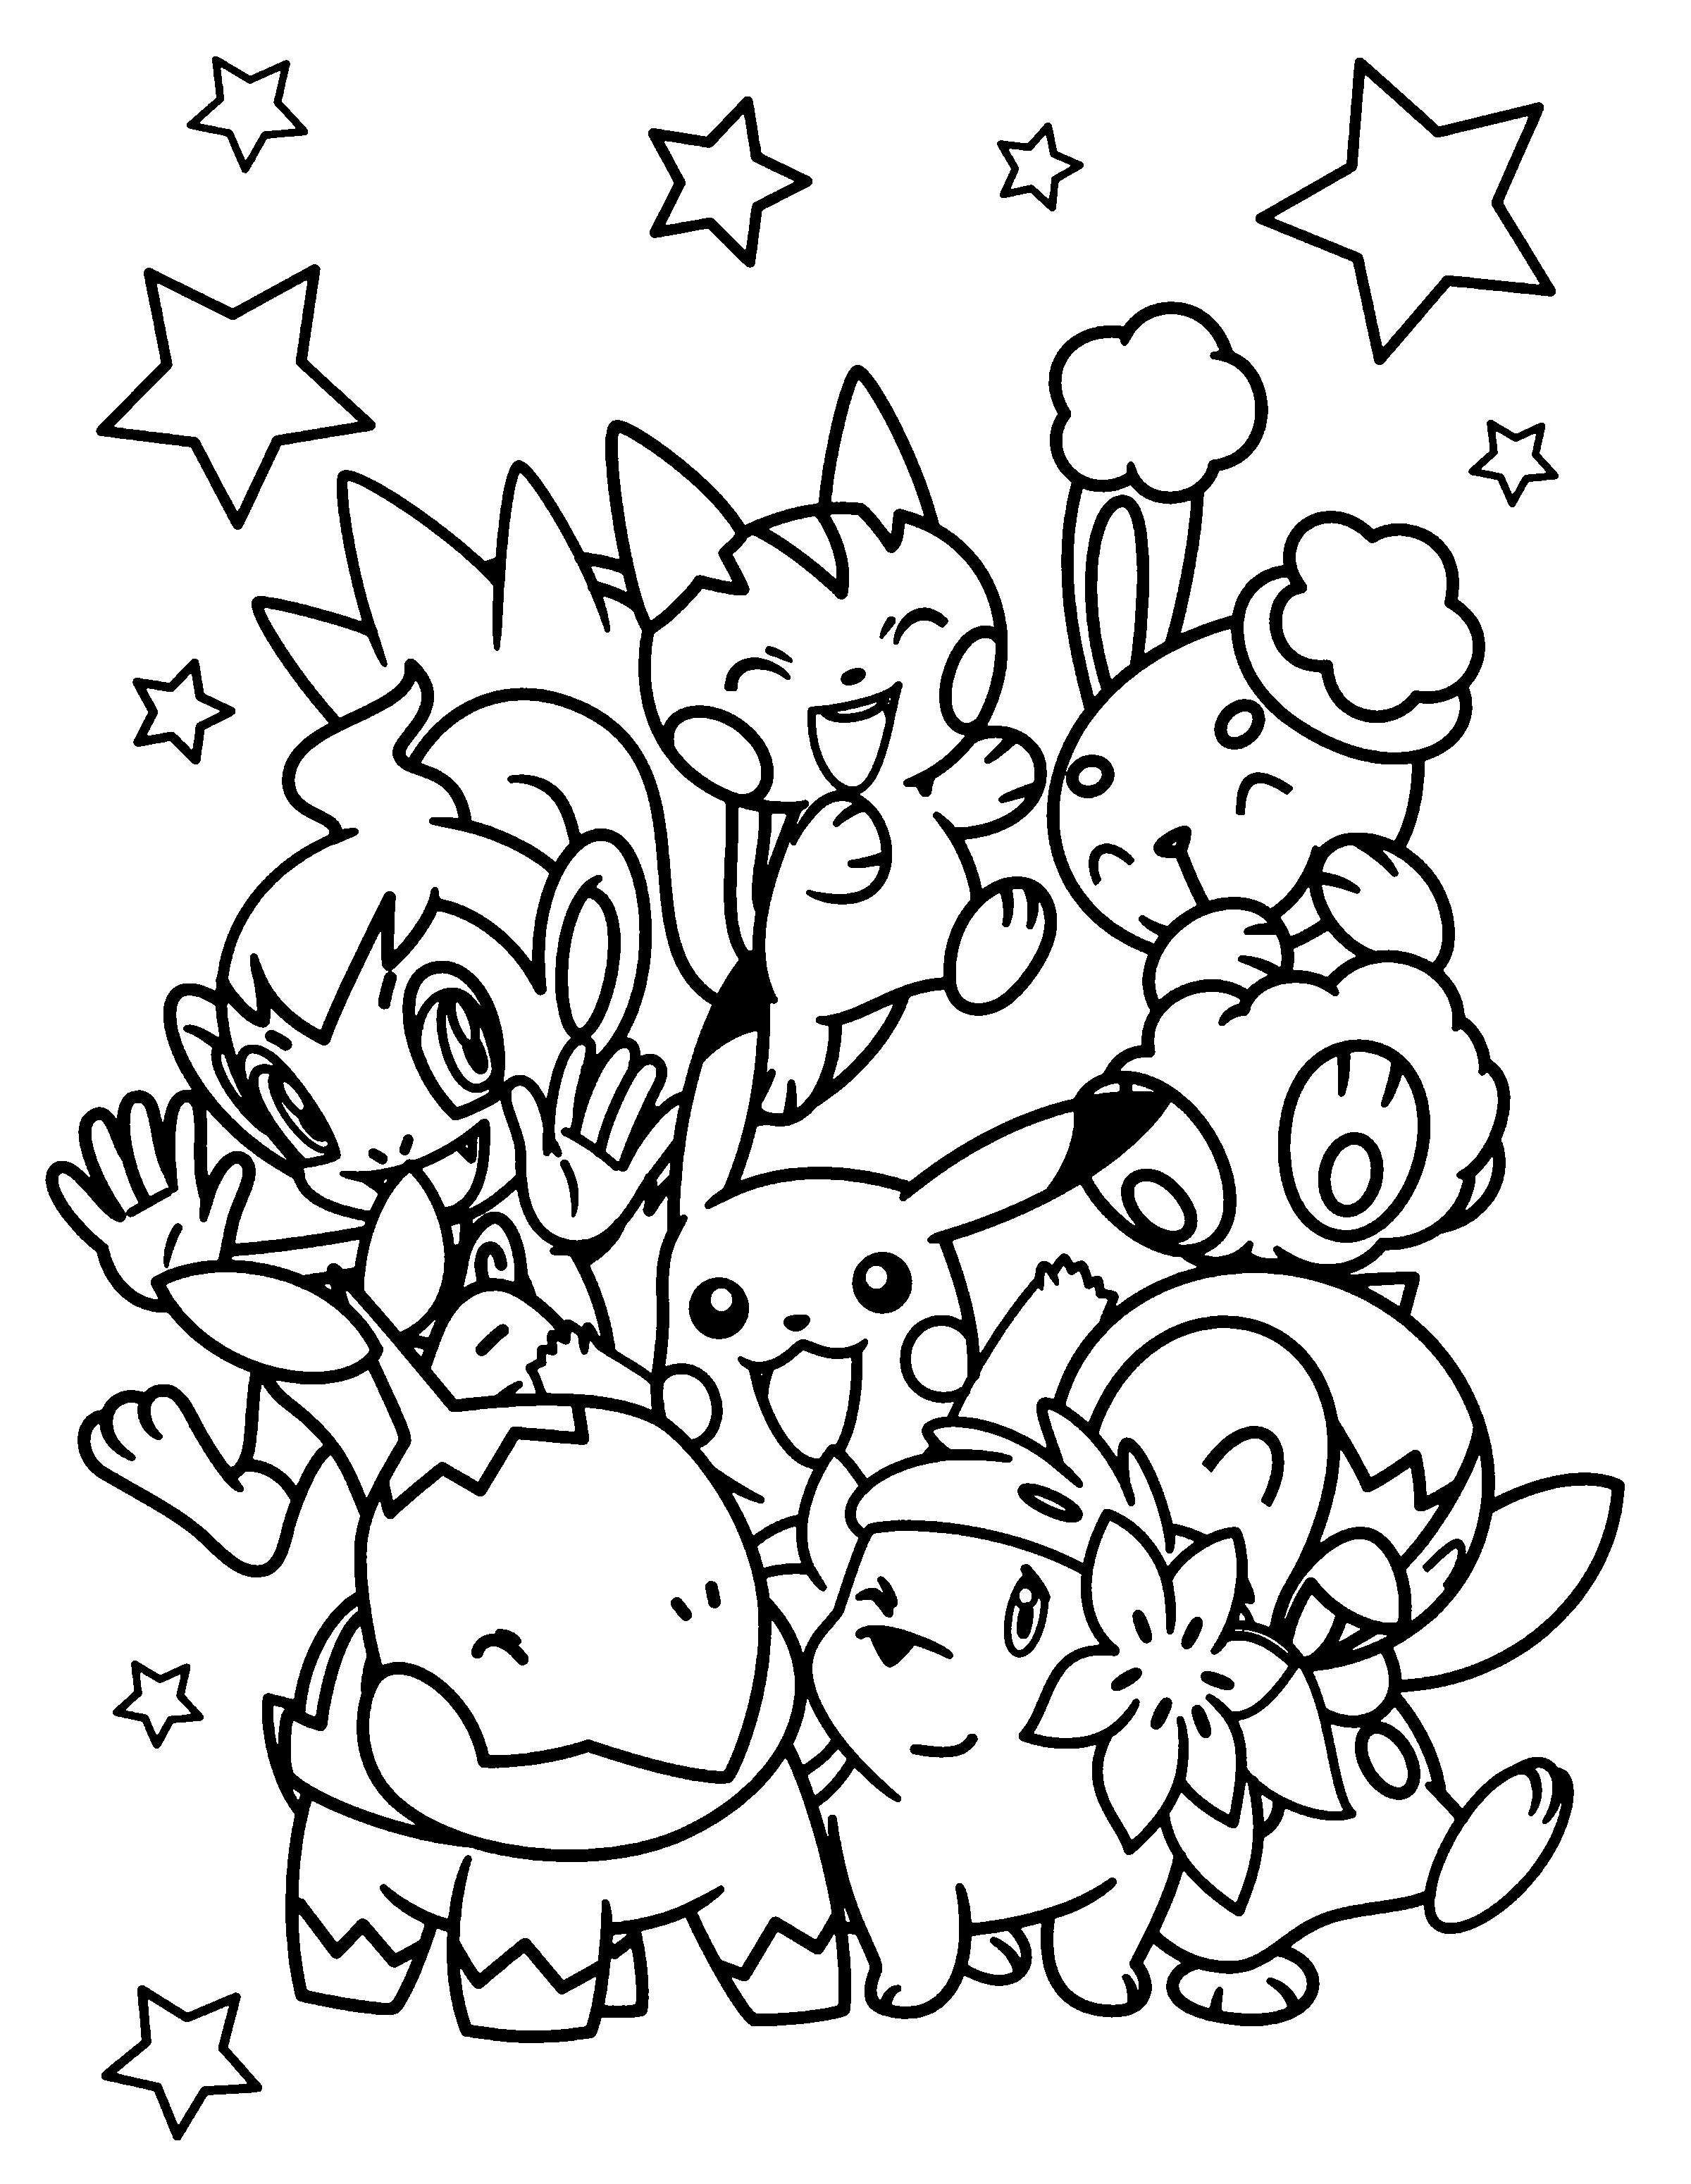 Starter Pokemon Coloring Pages at GetColorings.com | Free printable